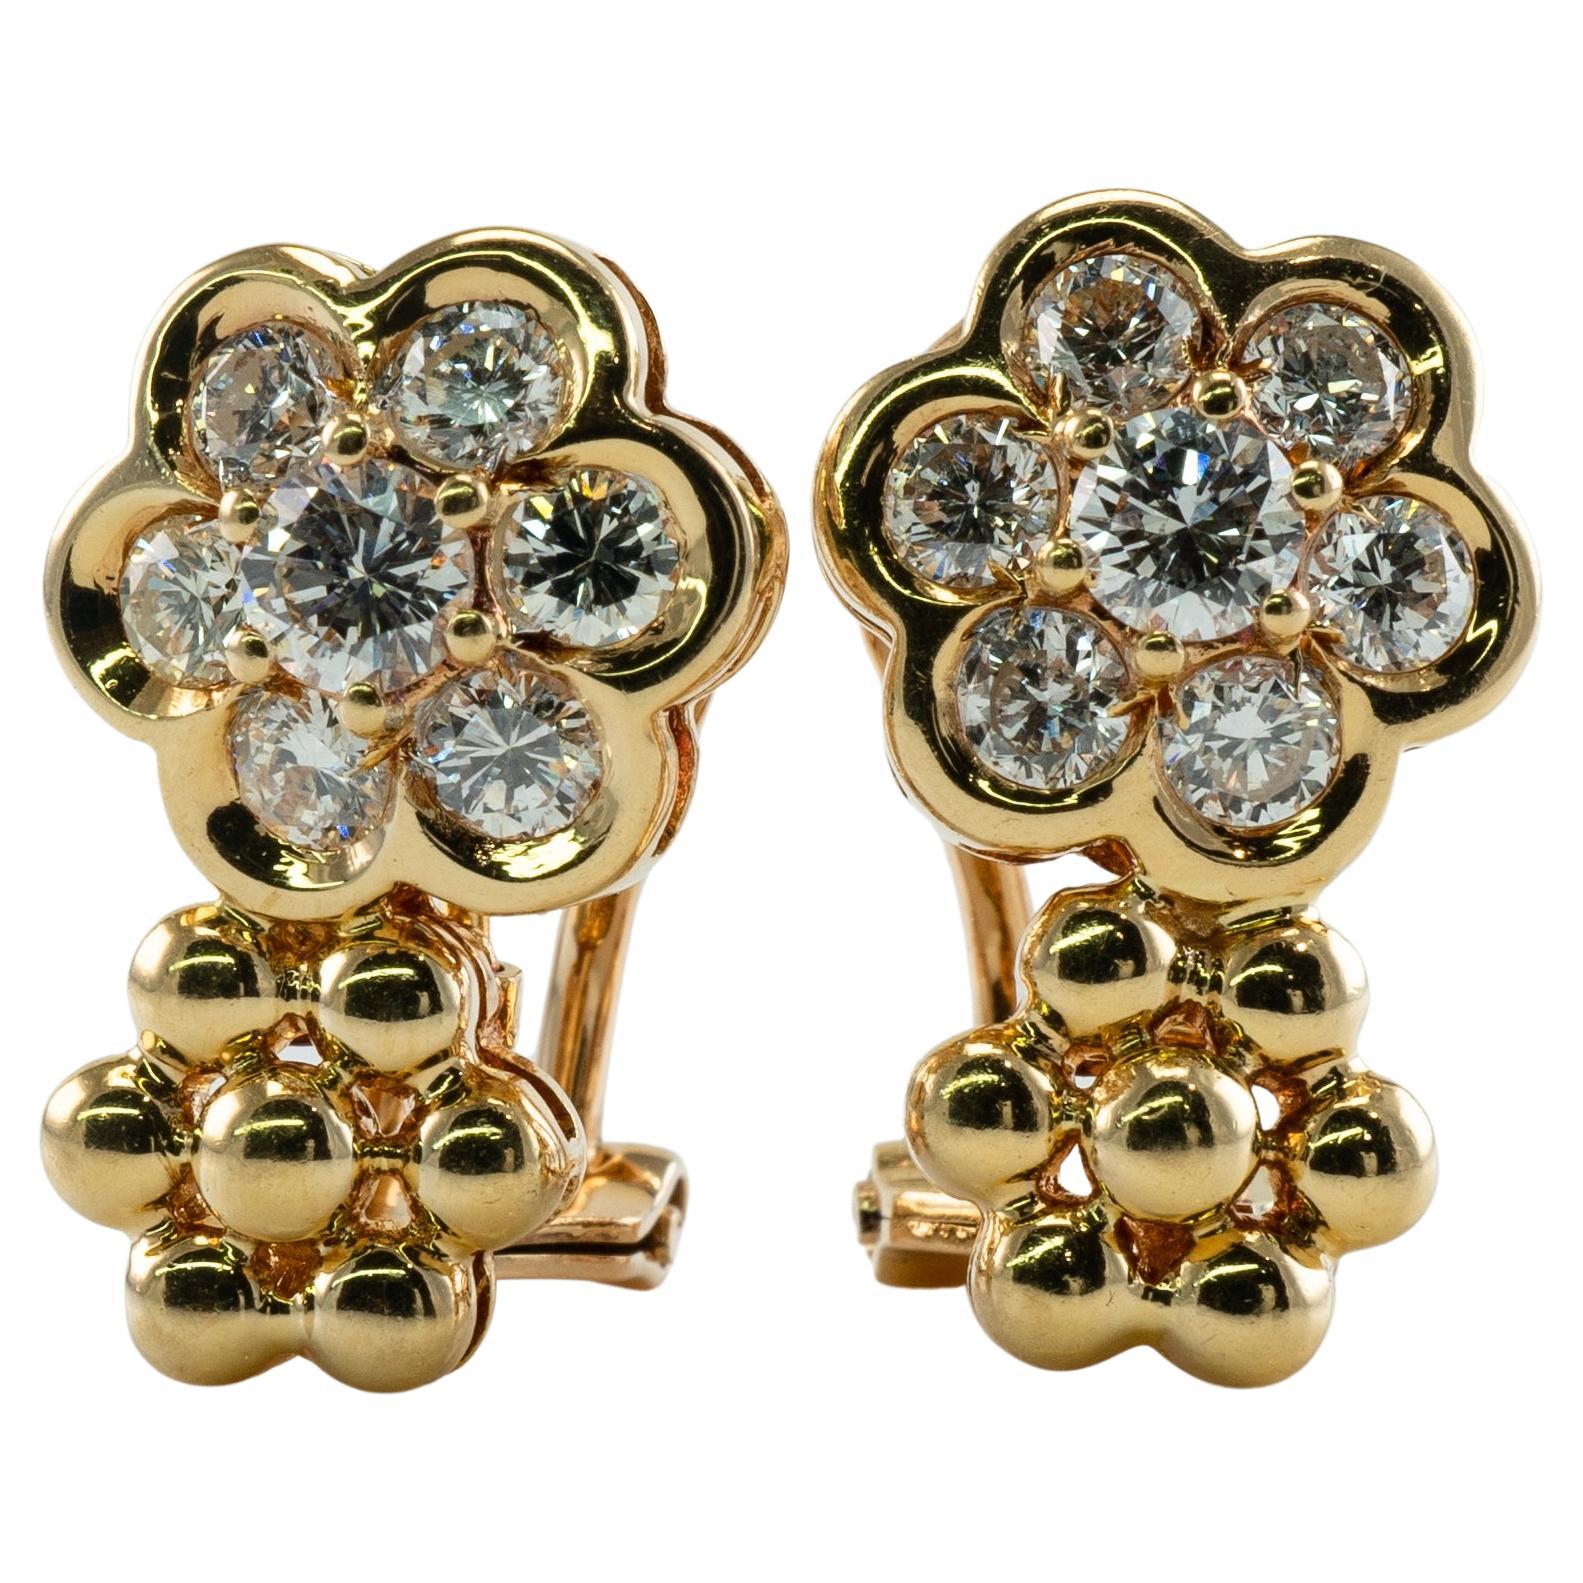 Cluster Diamond Flower Earrings 18K Gold 1.32 TDW Convertible Pierced and Clips